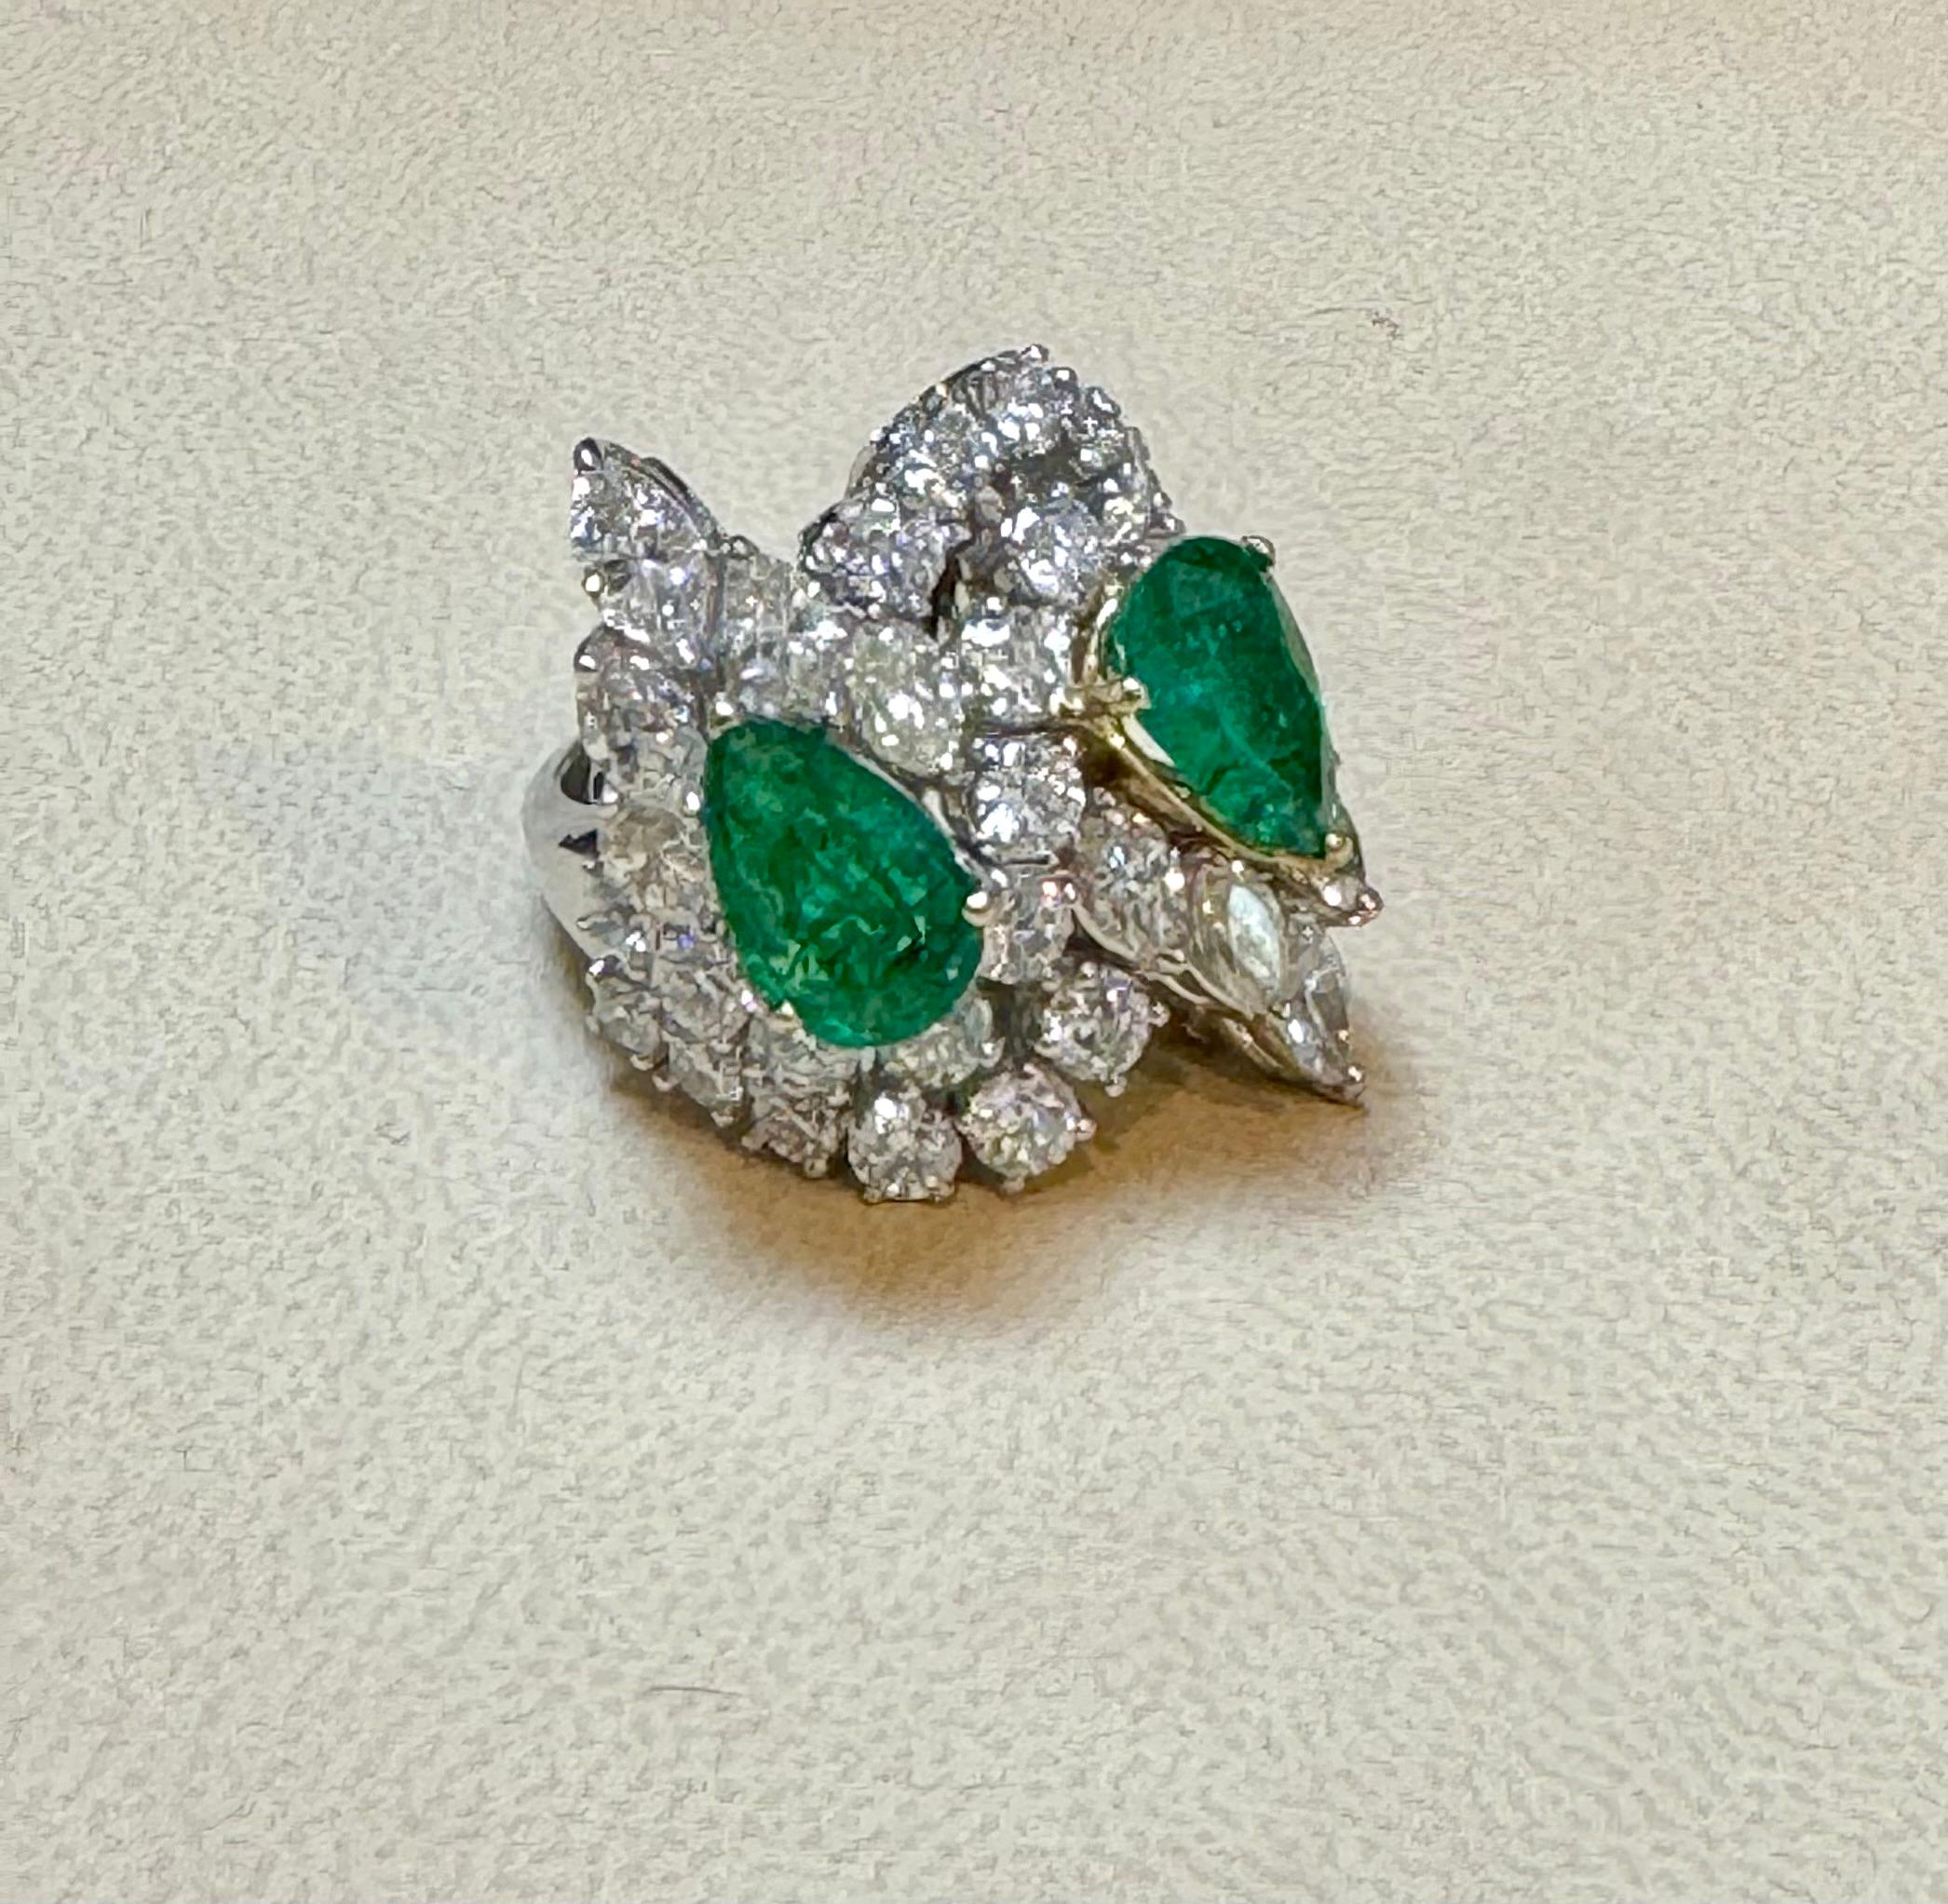 Two Pear shape 5.5 Ct Emerald  & 8.5 Ct Diamond Ring,  18K White Gold Size 6 For Sale 5